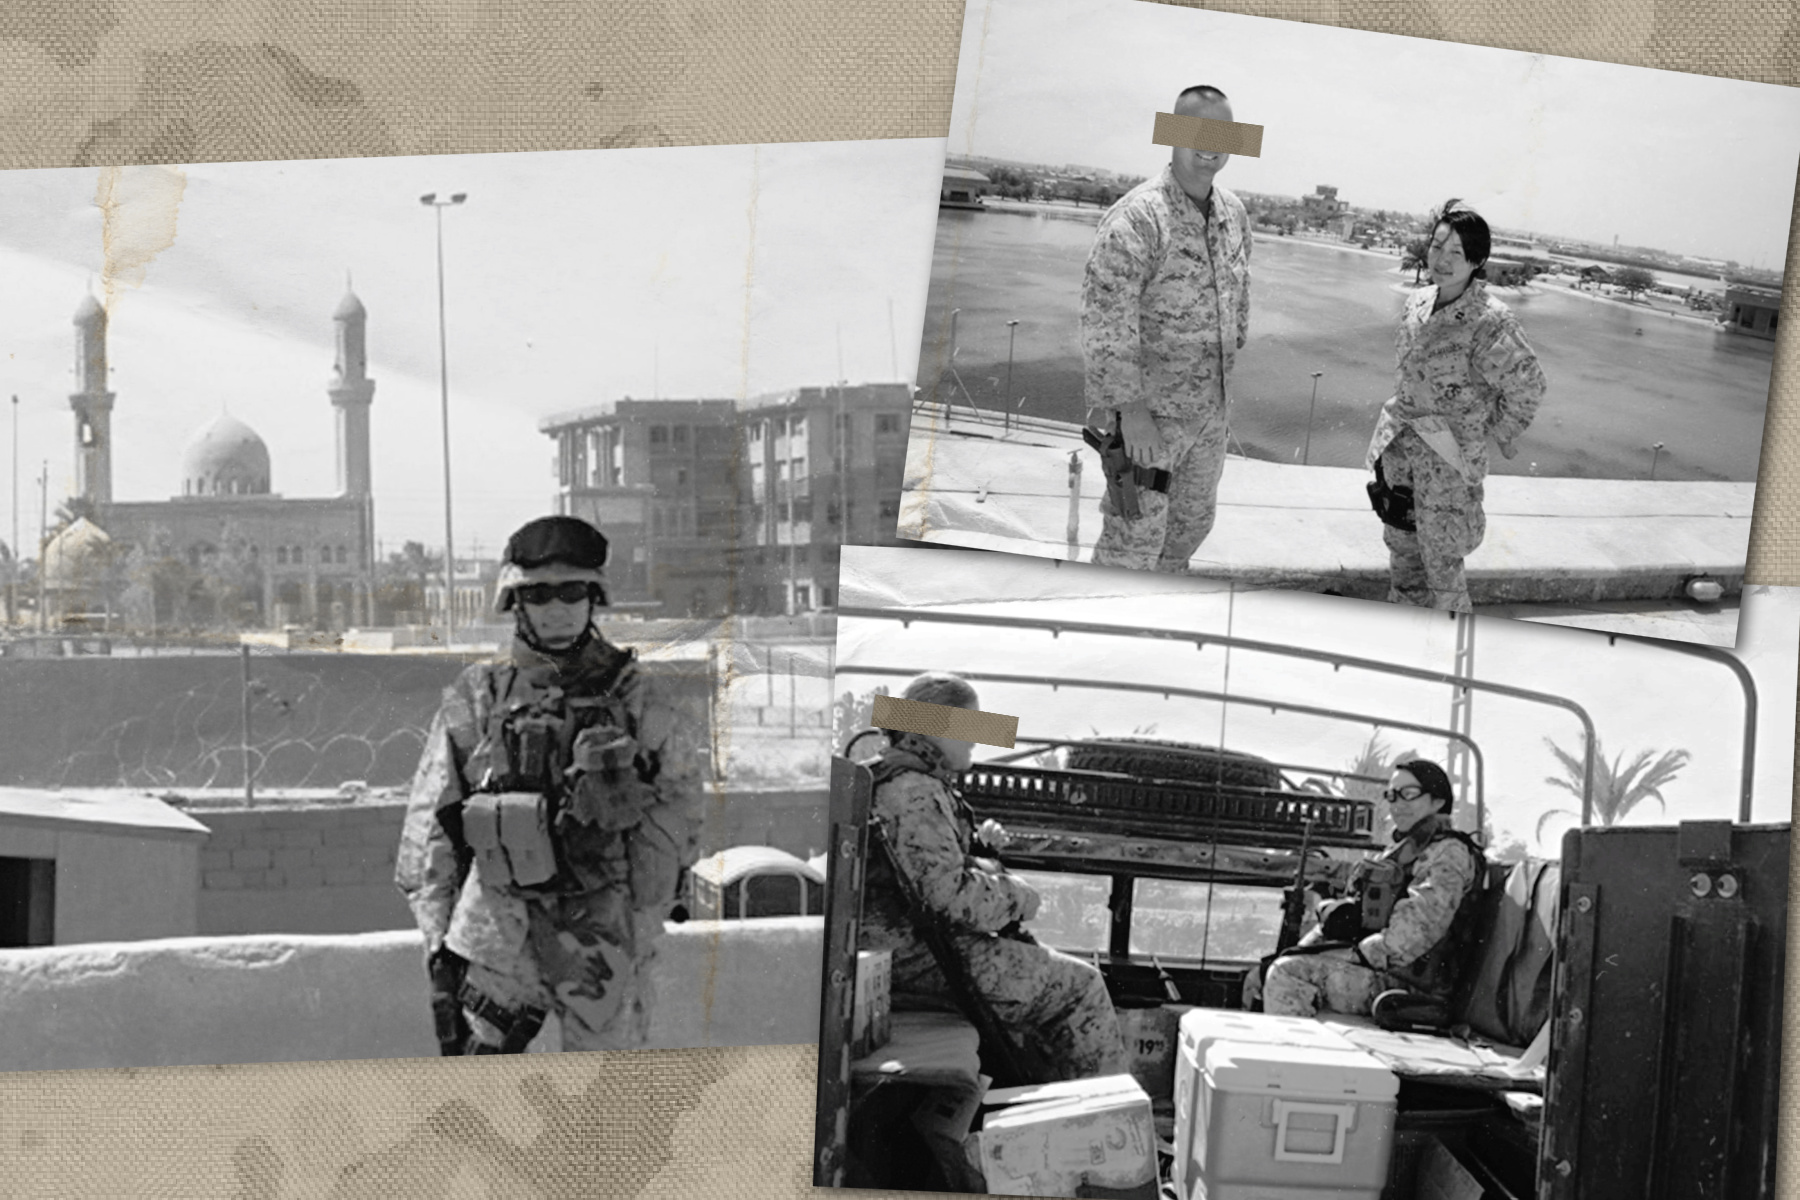 Collage of images of an soldier on active duty around the middle east.